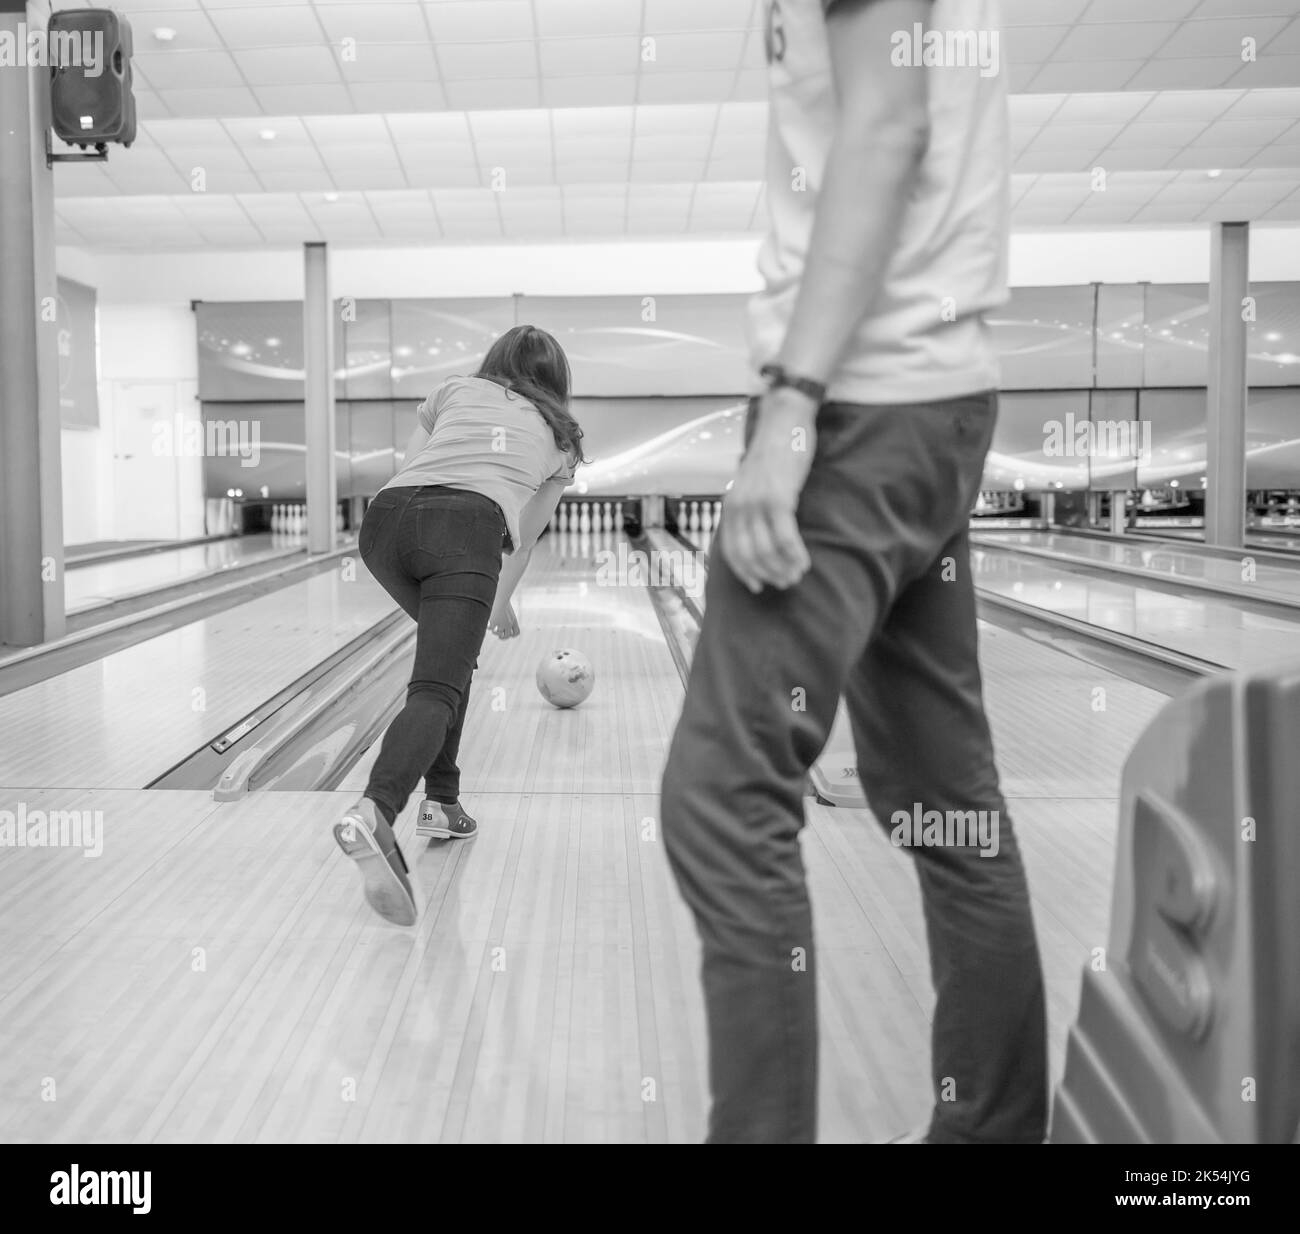 A woman throws a ball into a bowling alley. Paths with balls and pins for bowling. A fun game for the company. Stock Photo